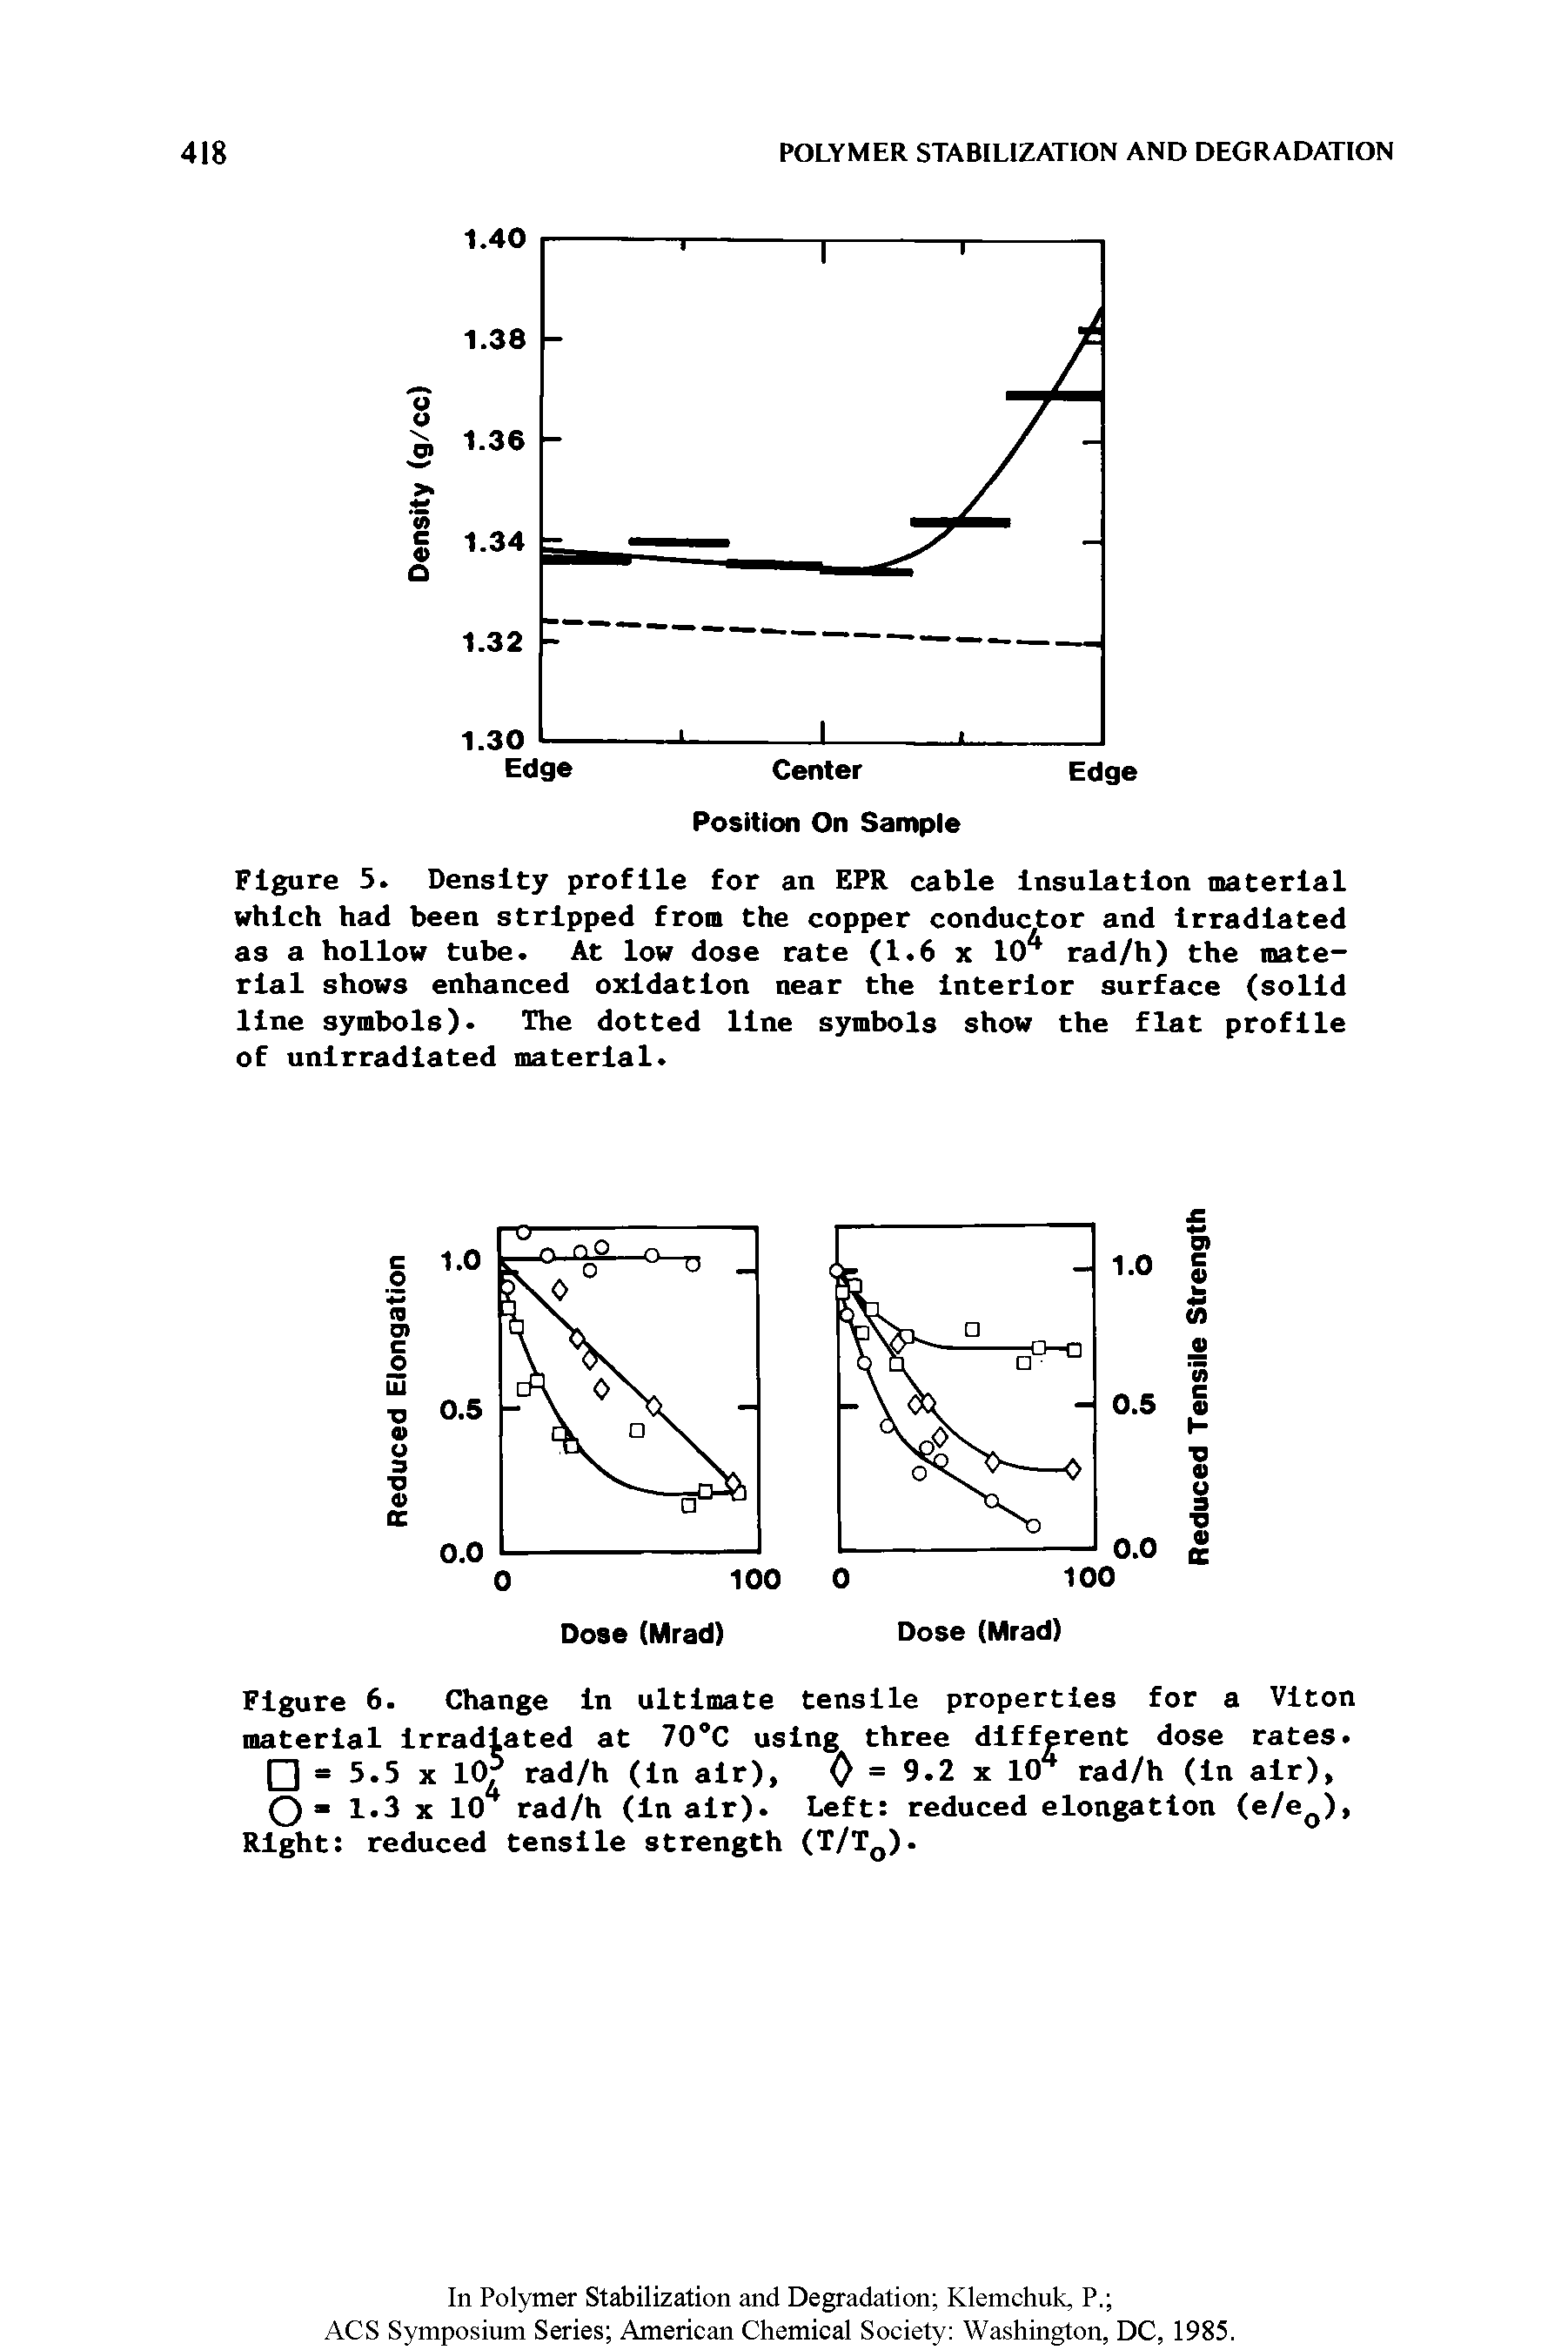 Figure 6- Change in ultimate tensile properties for a Viton material irradiated at 70°C using three different dose rates 5.5 x 10 rad/h (in air), 0 9.2 x 10 rad/h (in air), O 1 3 x 1<T rad/h (in air). Left reduced elongation (e/e0), Right reduced tensile strength (T/Tq).